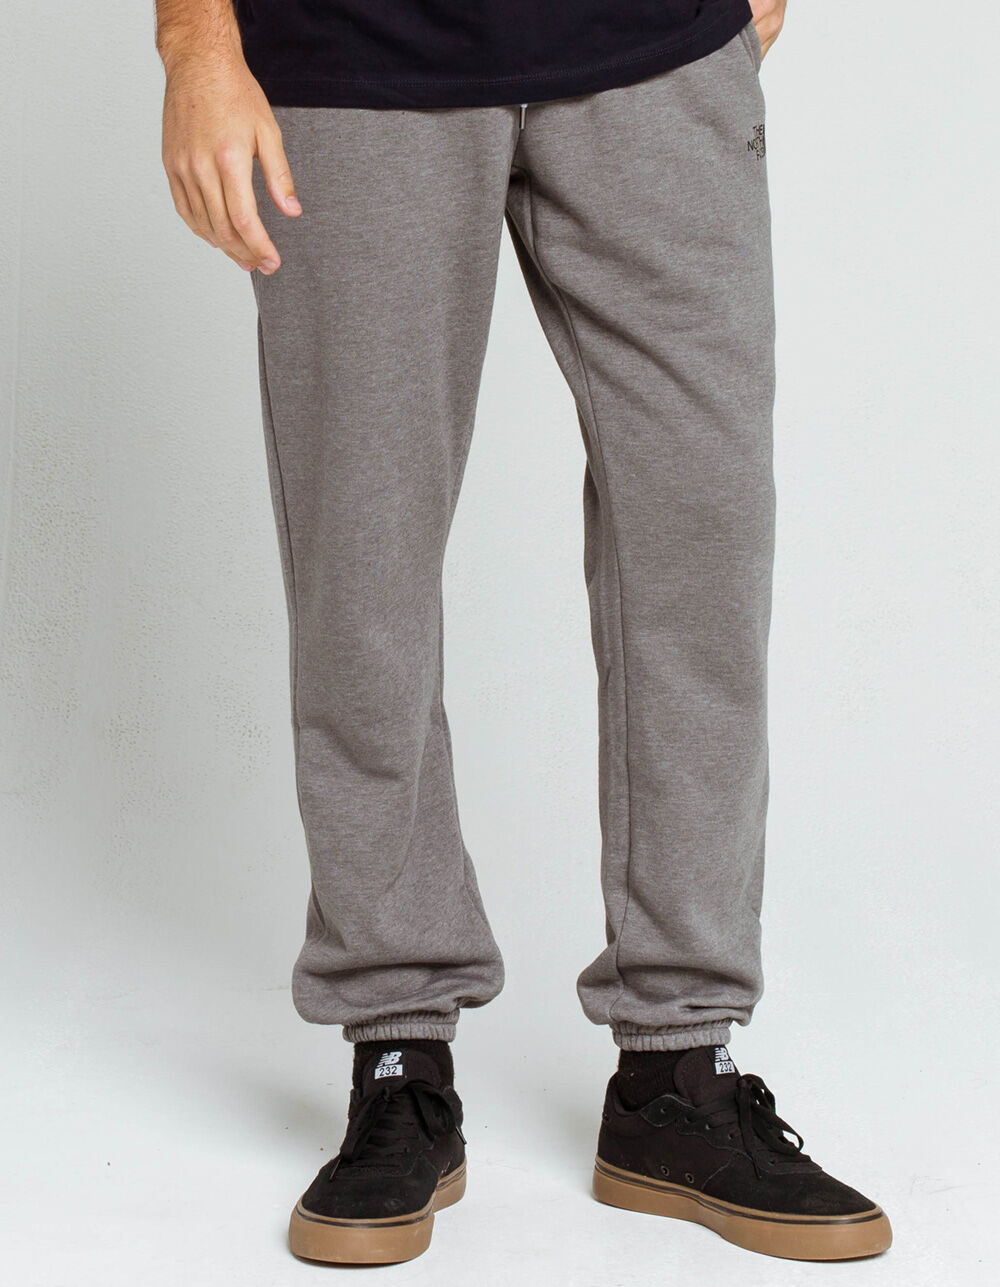 THE NORTH FACE Vert Mens Sweatpants - HEATHER GRAY | Tillys